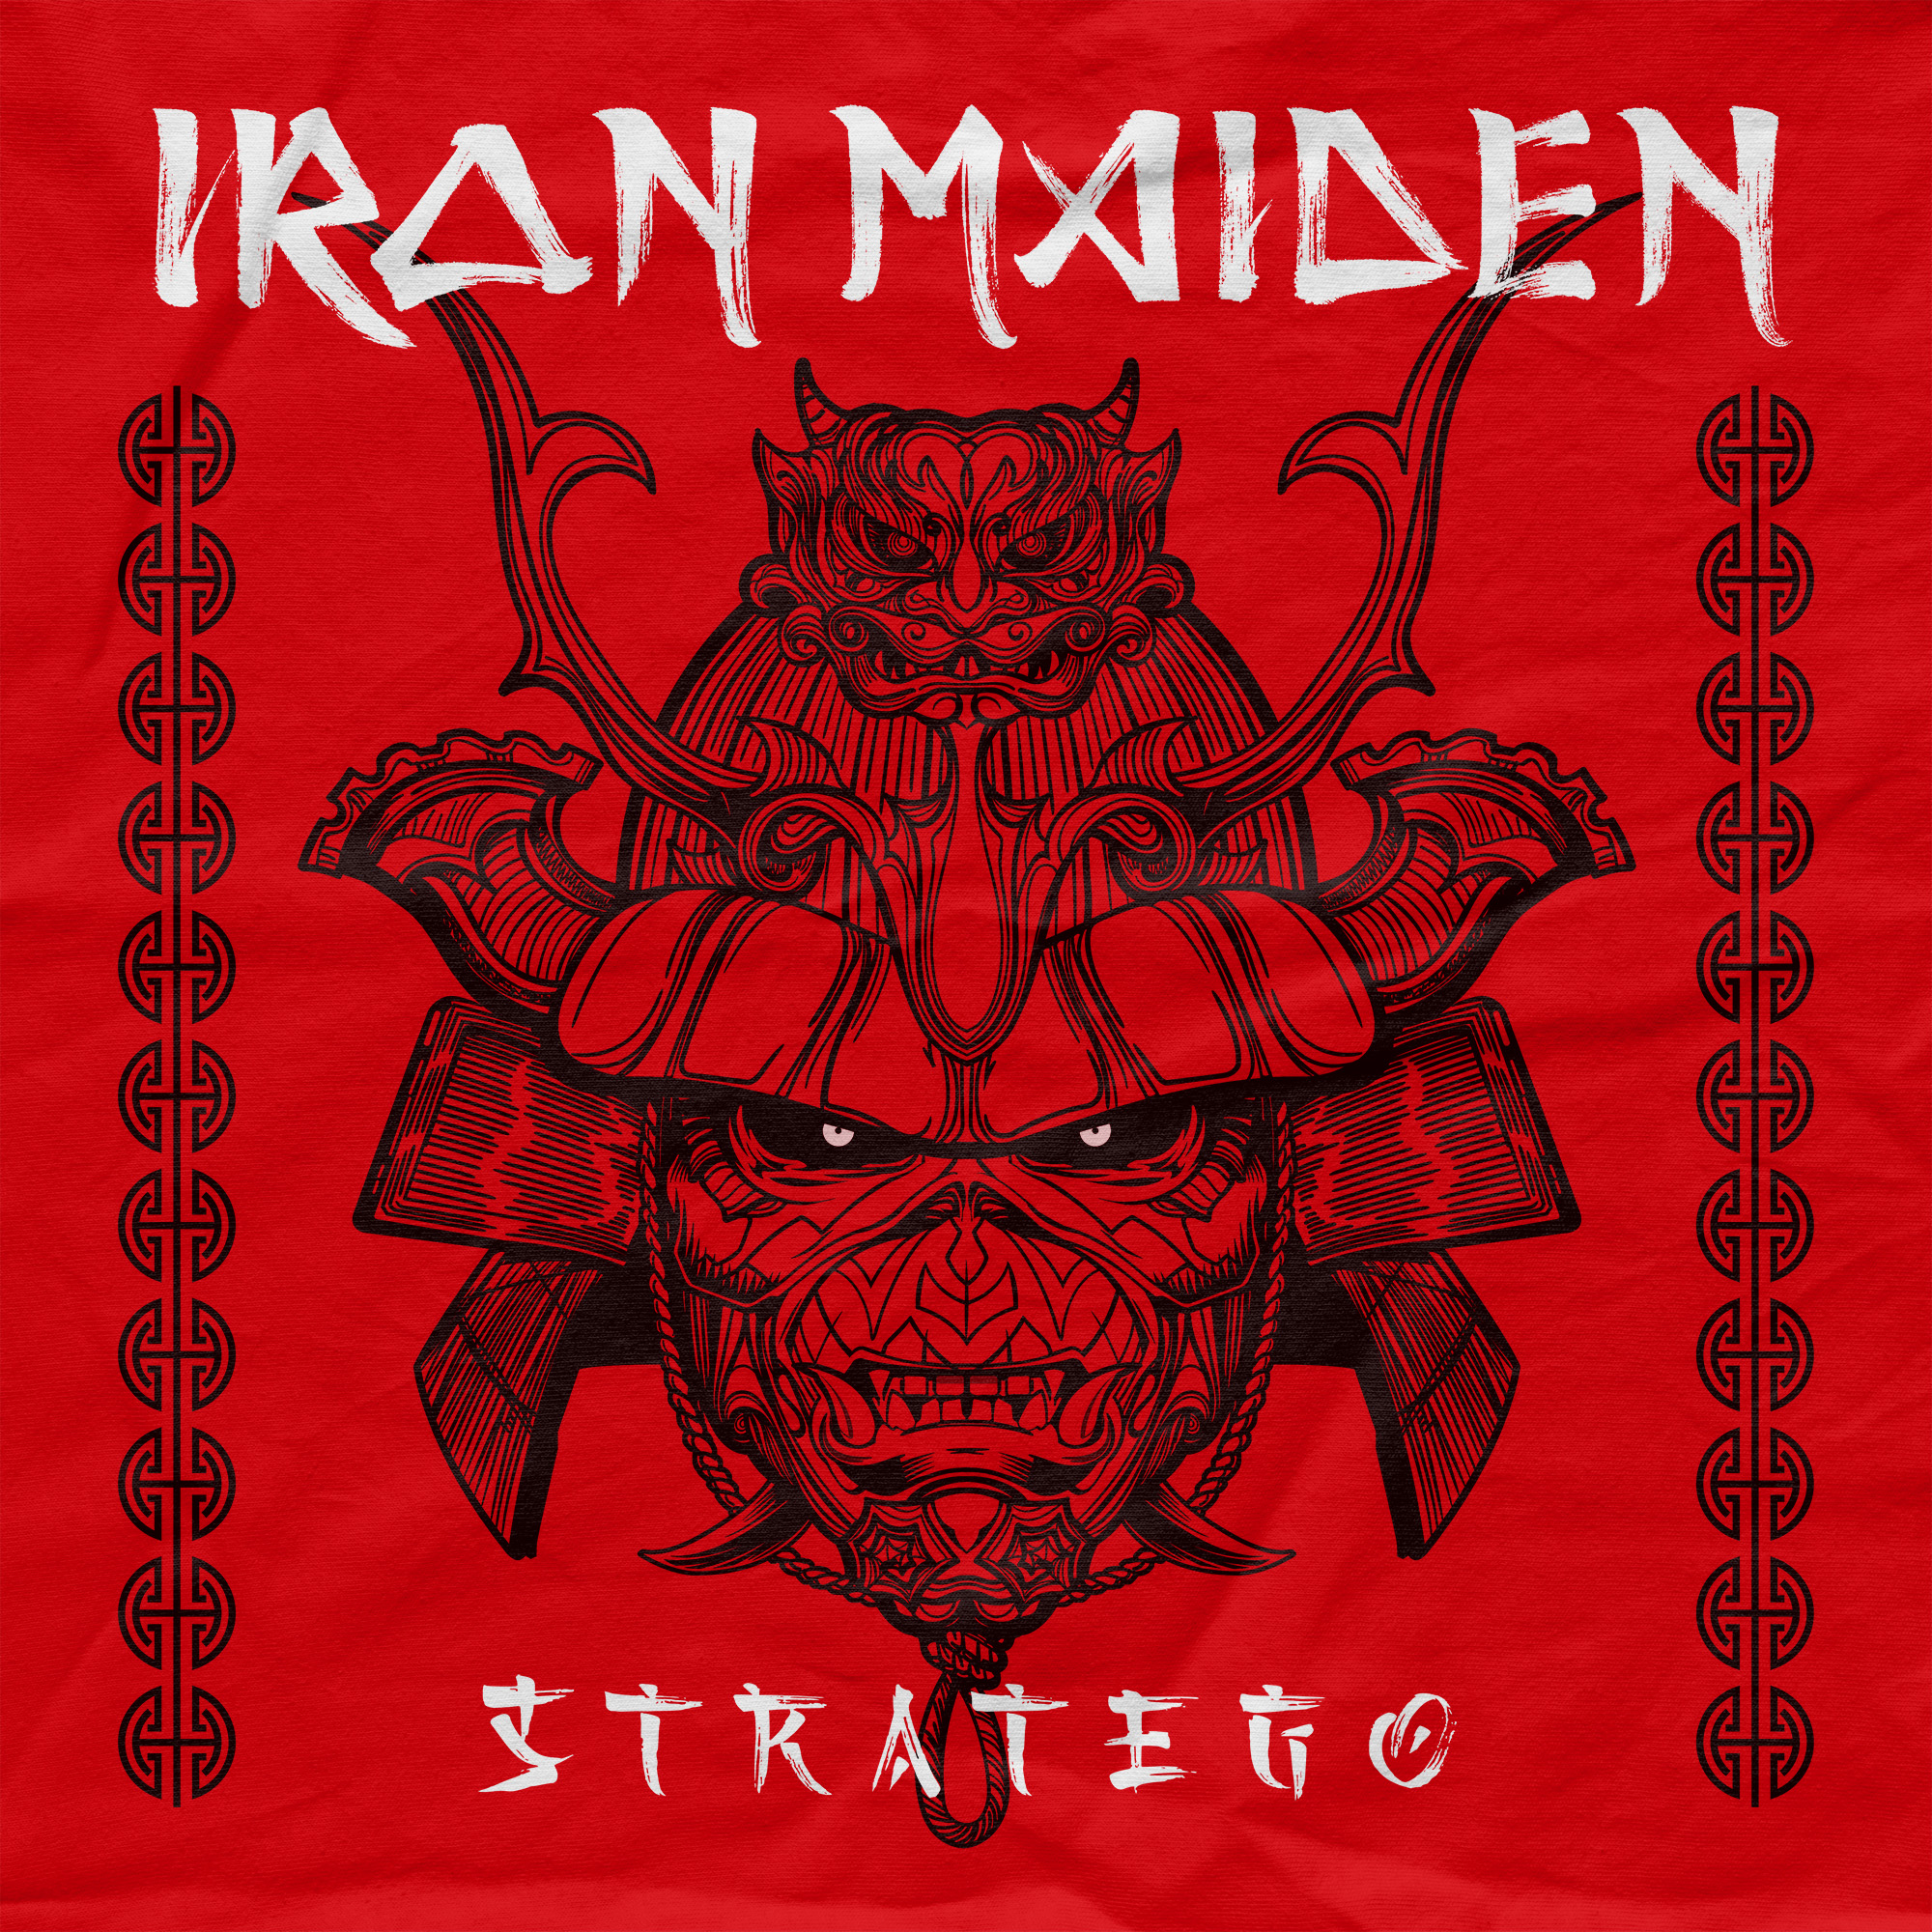 Iron Maiden on X: New track alert! 'Stratego' will be dropping on to your  favourite streaming platforms from 6pm BST (UK time) today! #IronMaiden  #Senjutsu #Stratego  / X